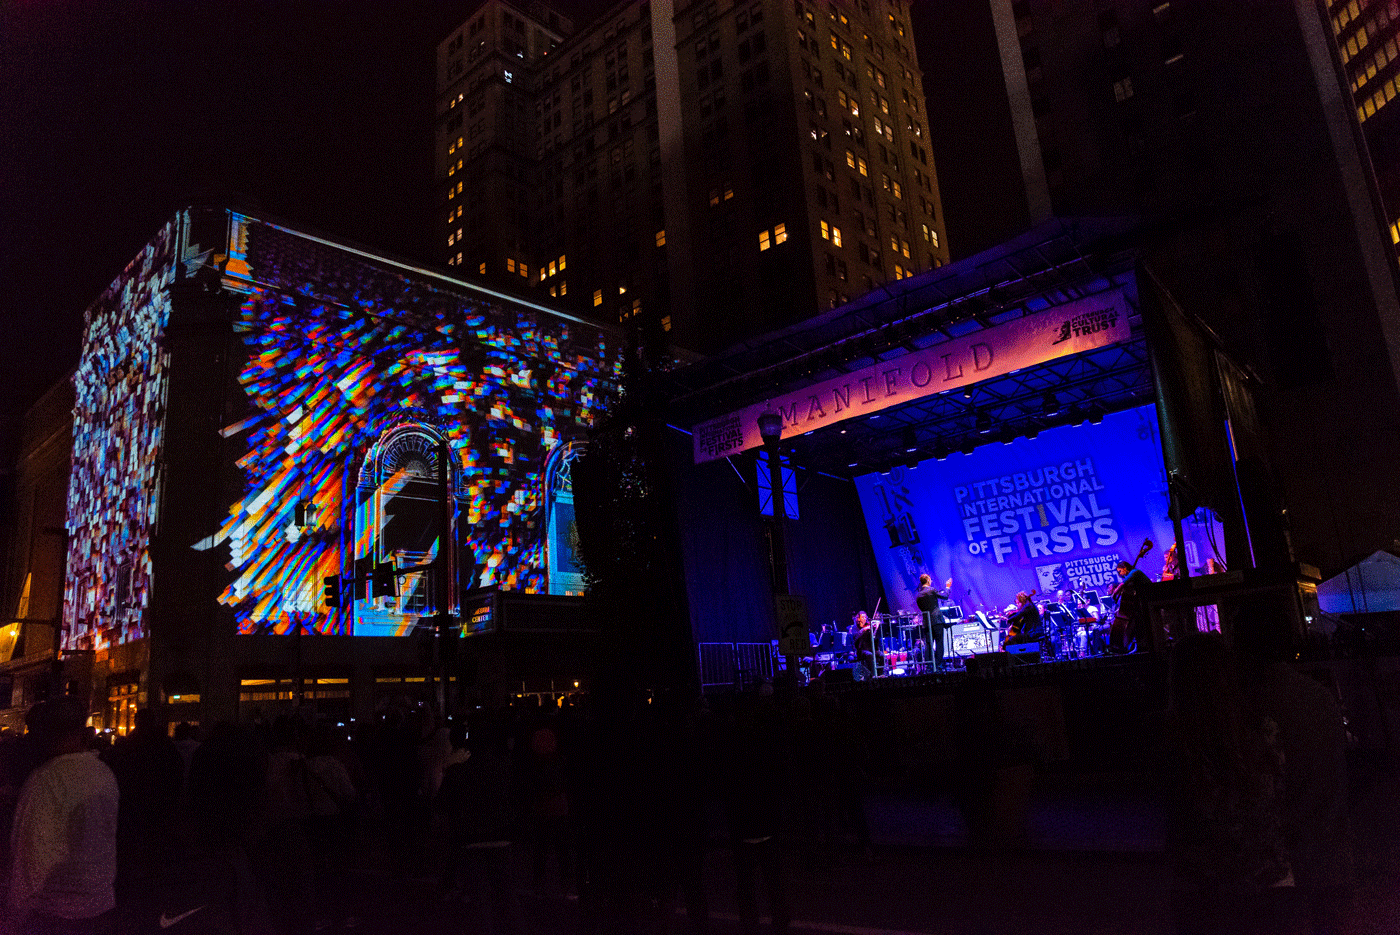 A Symphony Plays On A Stage In Front Of An Illuminated Building